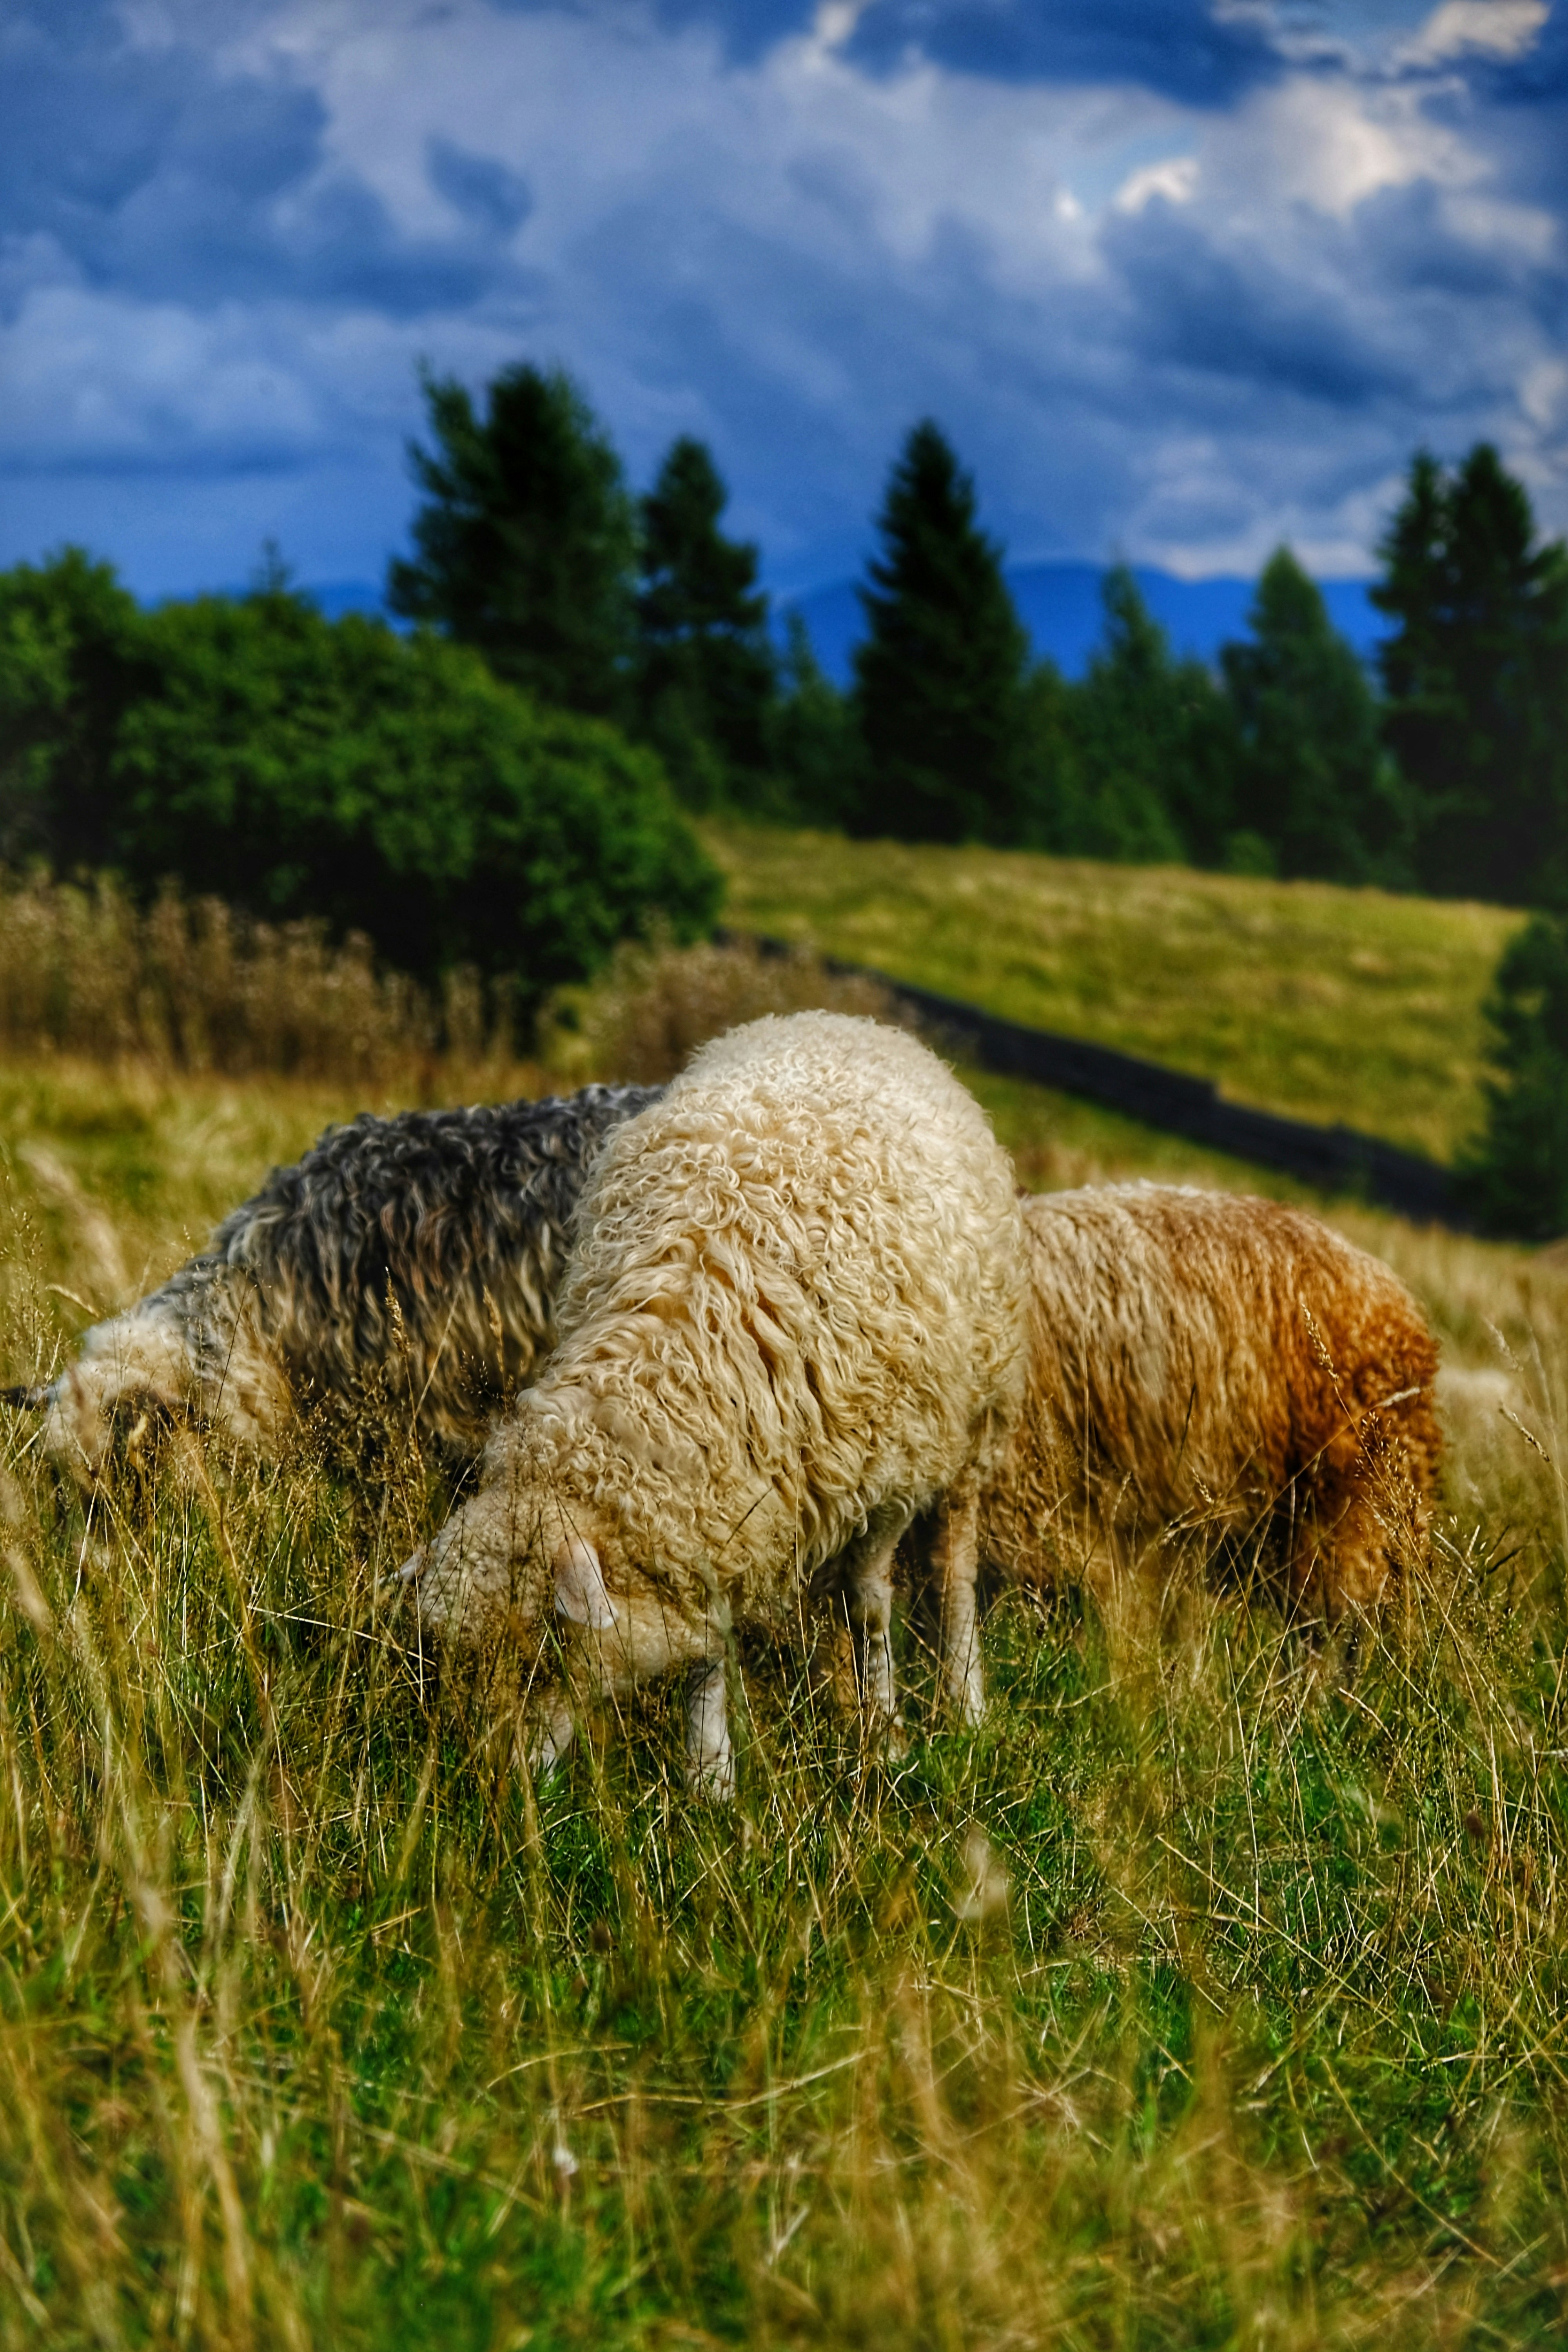 white sheep on green grass field during daytime